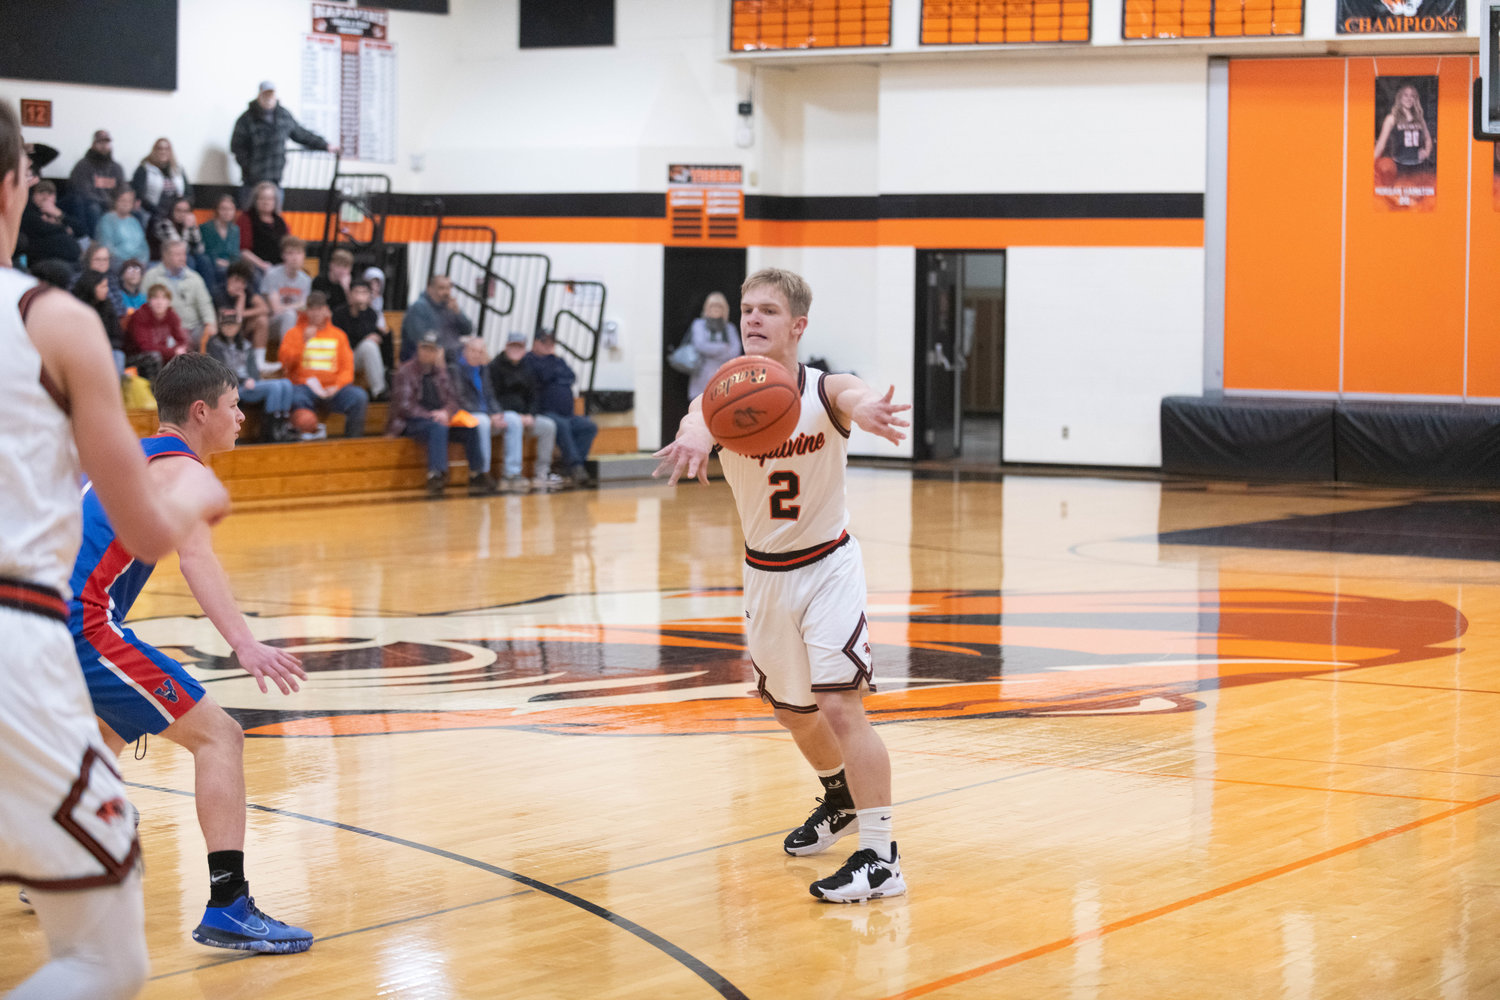 Cael Stanley fires a pass into the corner during the first quarter of Napavine's 81-50 win over Willapa Valley on Dec. 27.